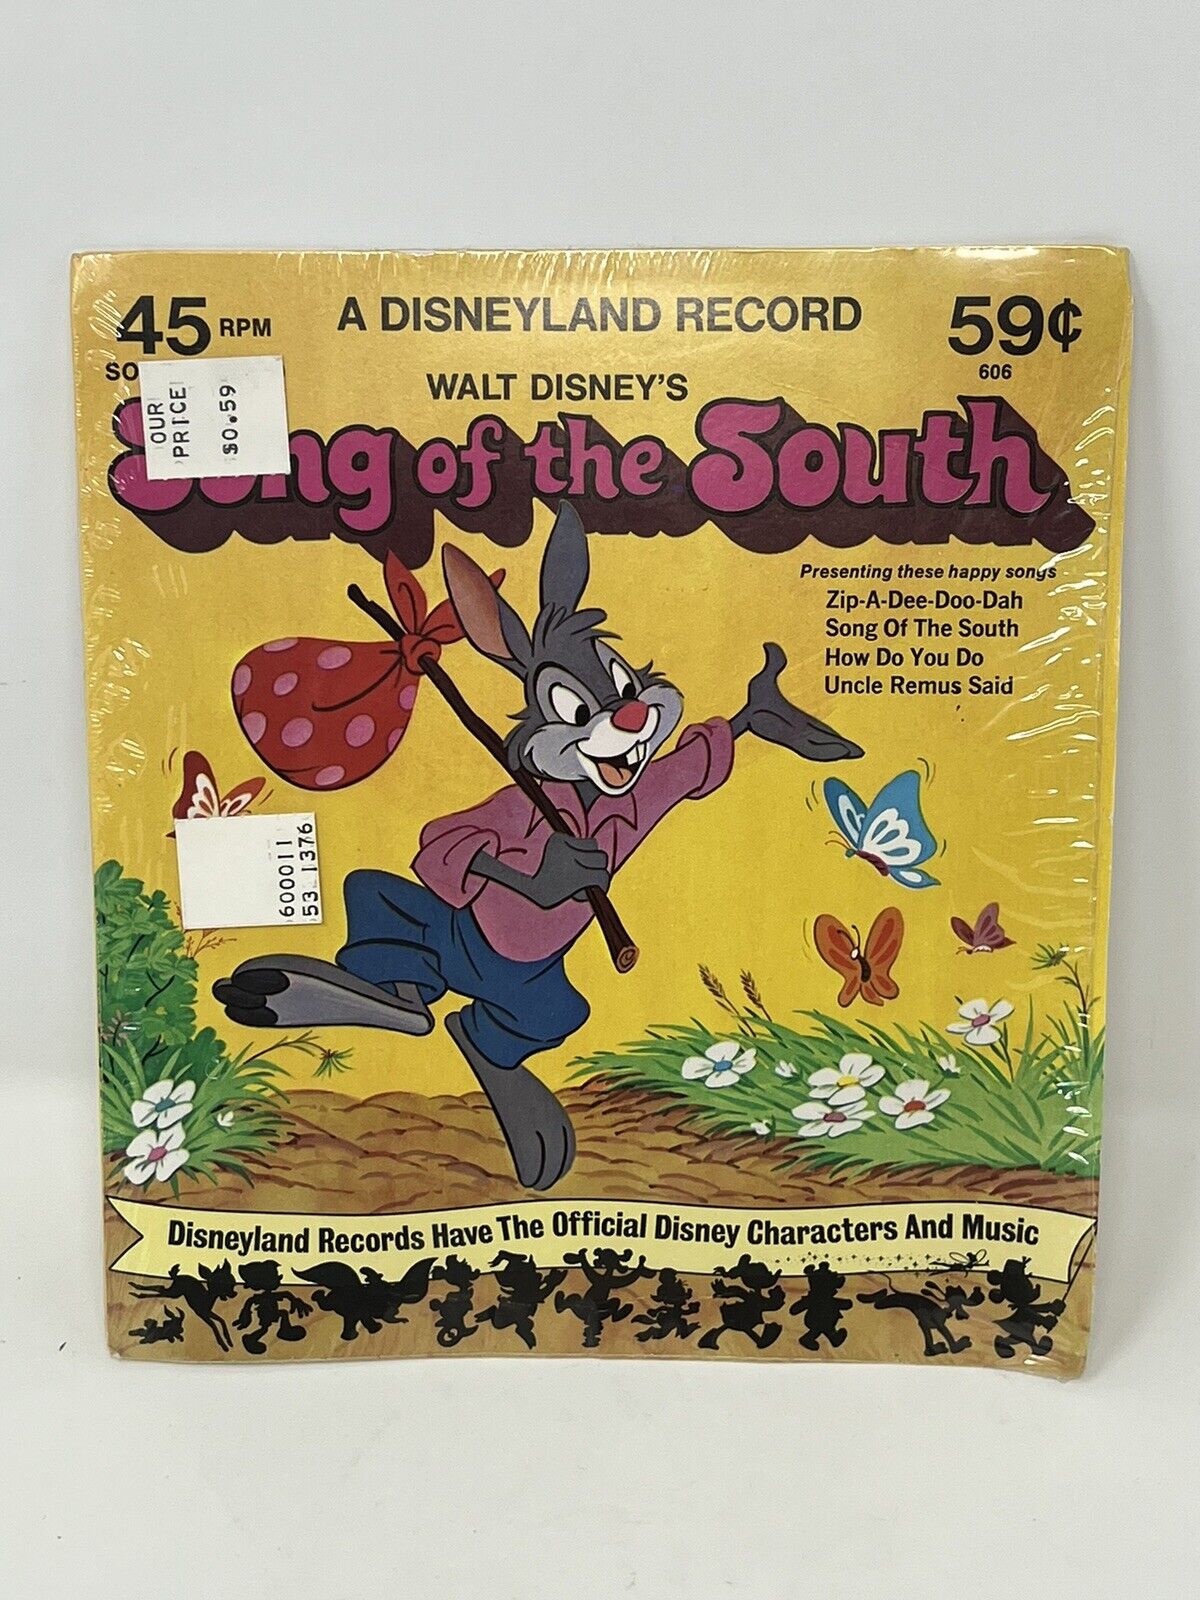 Vintage Rare Rare Disneyland Record 45 rpm Song Of The South, Vinyl Record